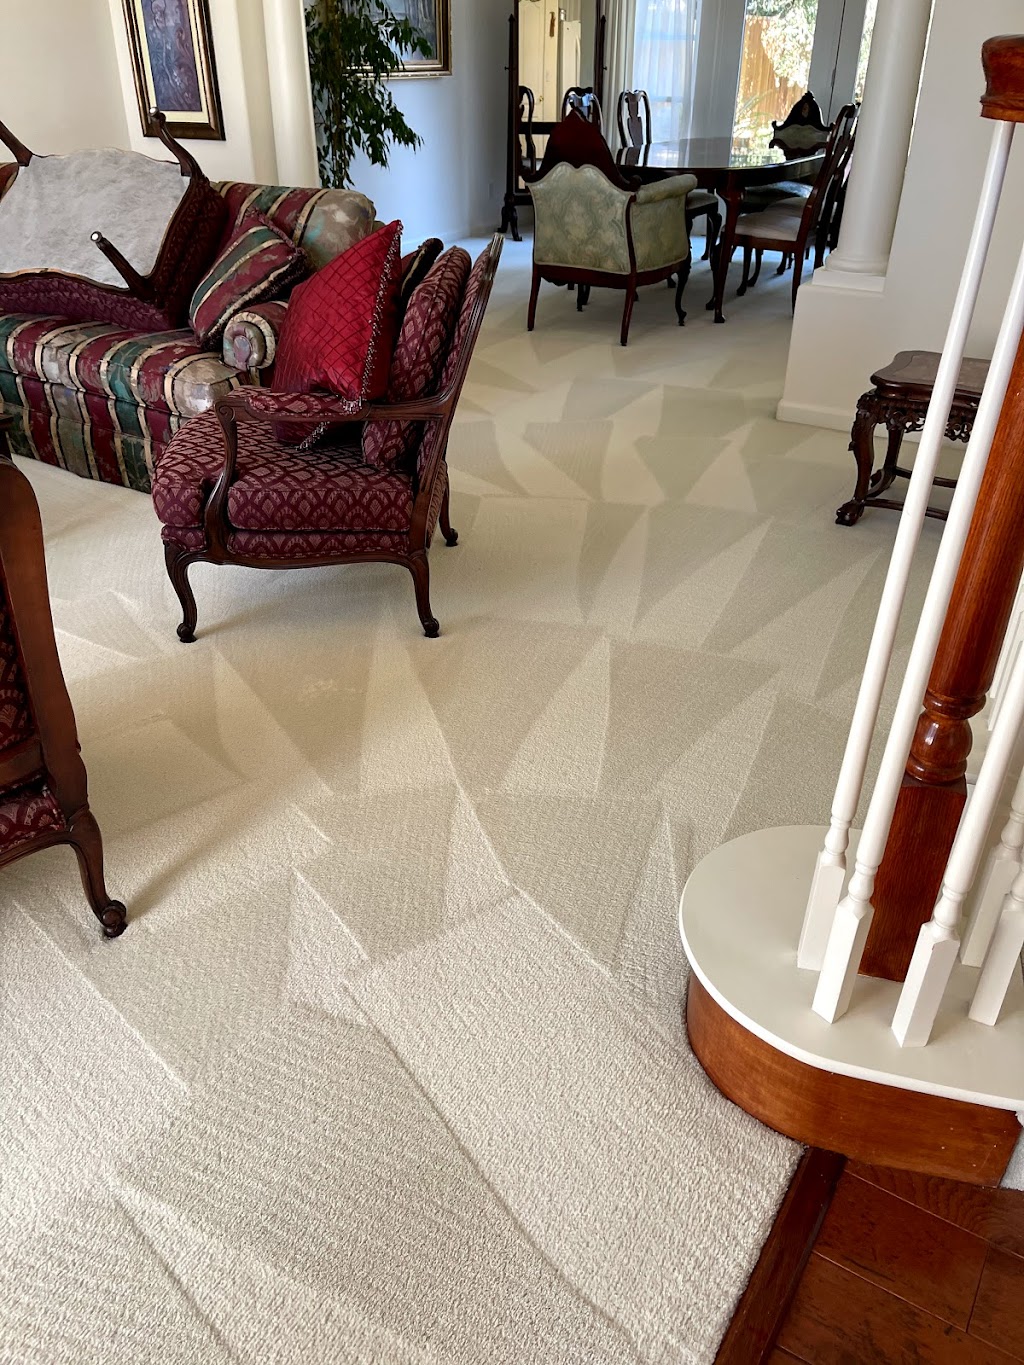 A-1 Steamway Carpet Cleaning | 1051 Exeter Ave, Modesto, CA 95350, USA | Phone: (209) 648-0596